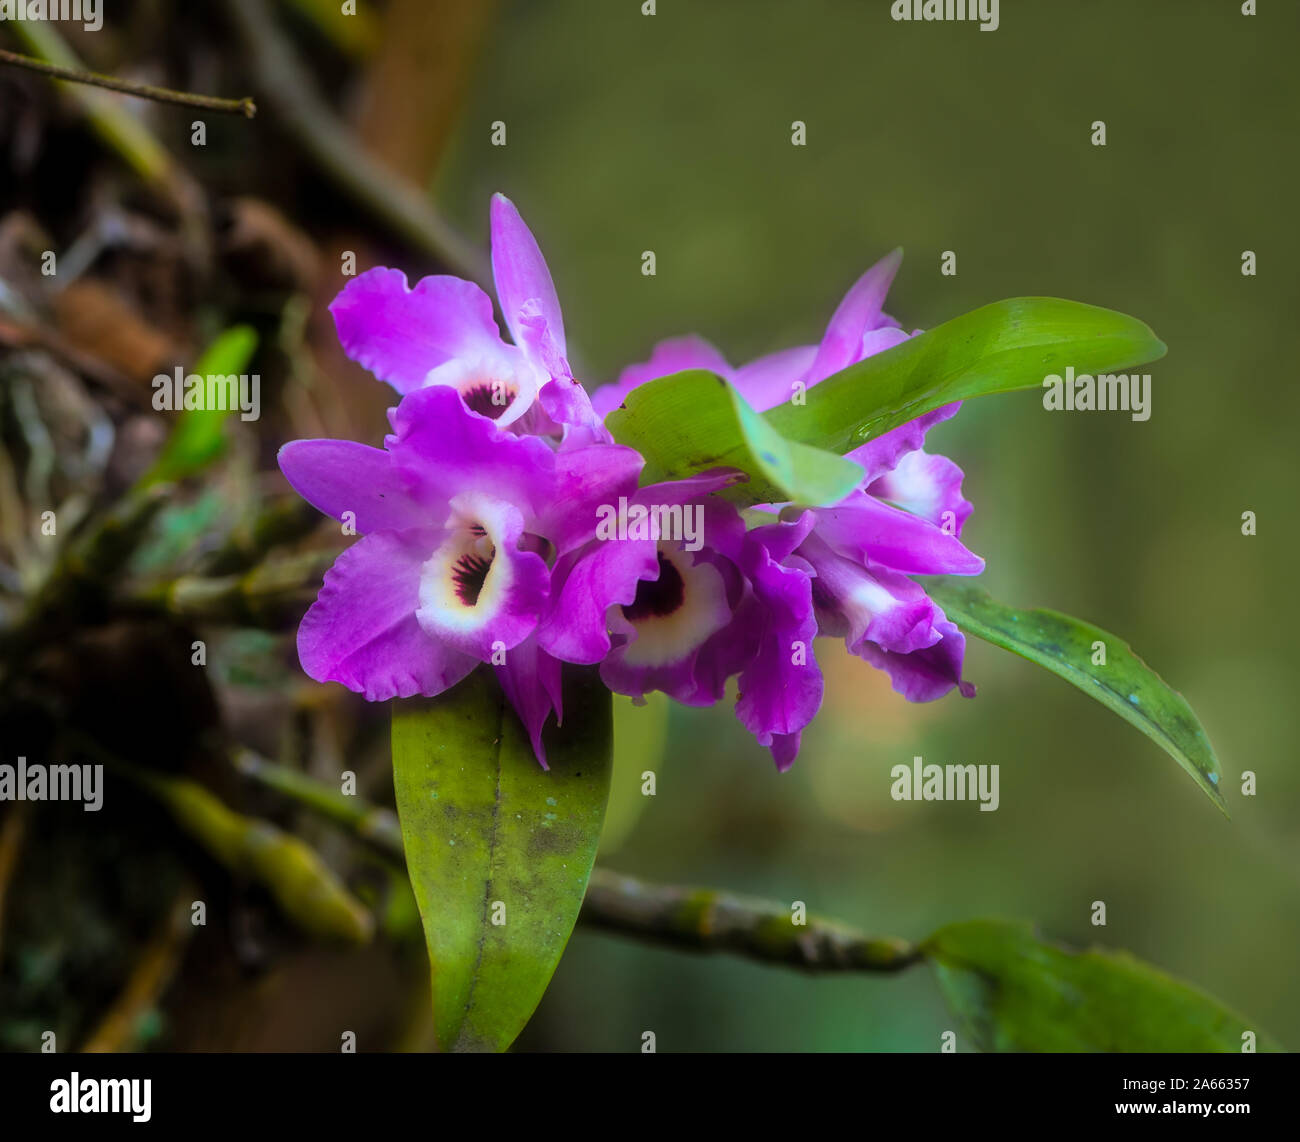 Laelia orchids in nature on green background Stock Photo